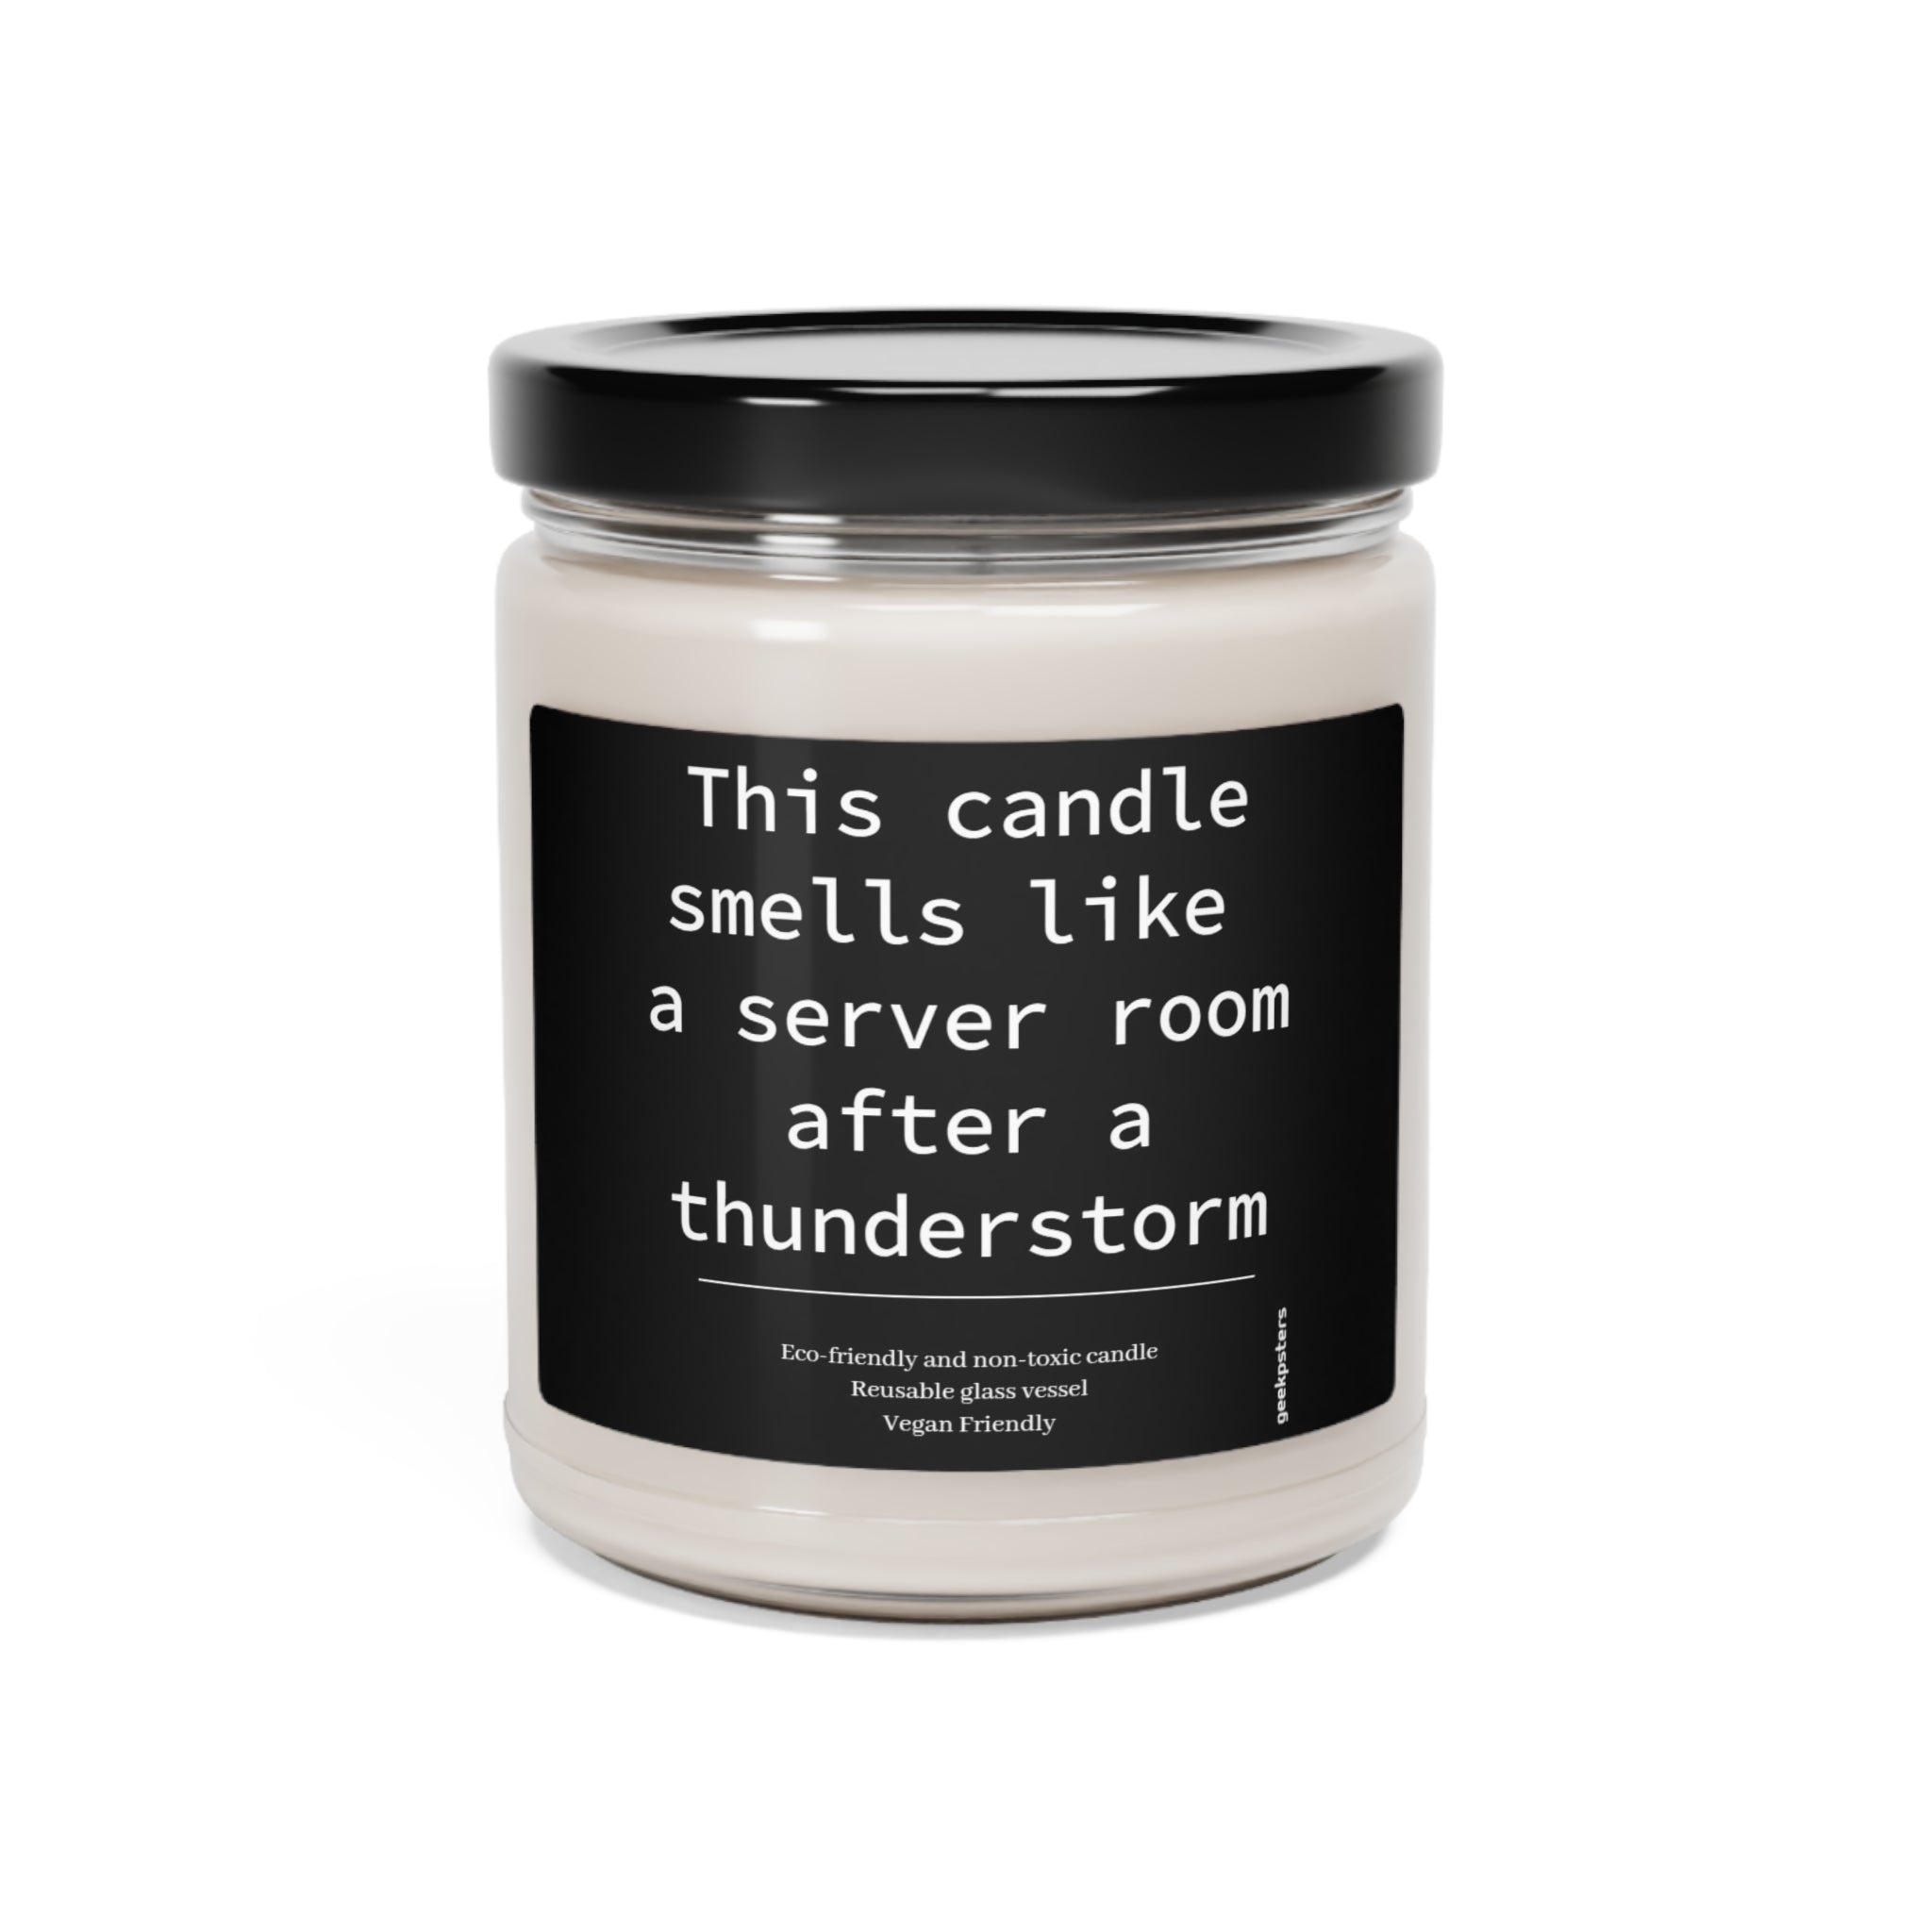 Soy wax blend scented candle designed to imitate the smell of a server room after a thunderstorm. 
Product Name: This Candle Smells Like a Server Room After a Thunderstorm - Scented Soy Candle, 9oz